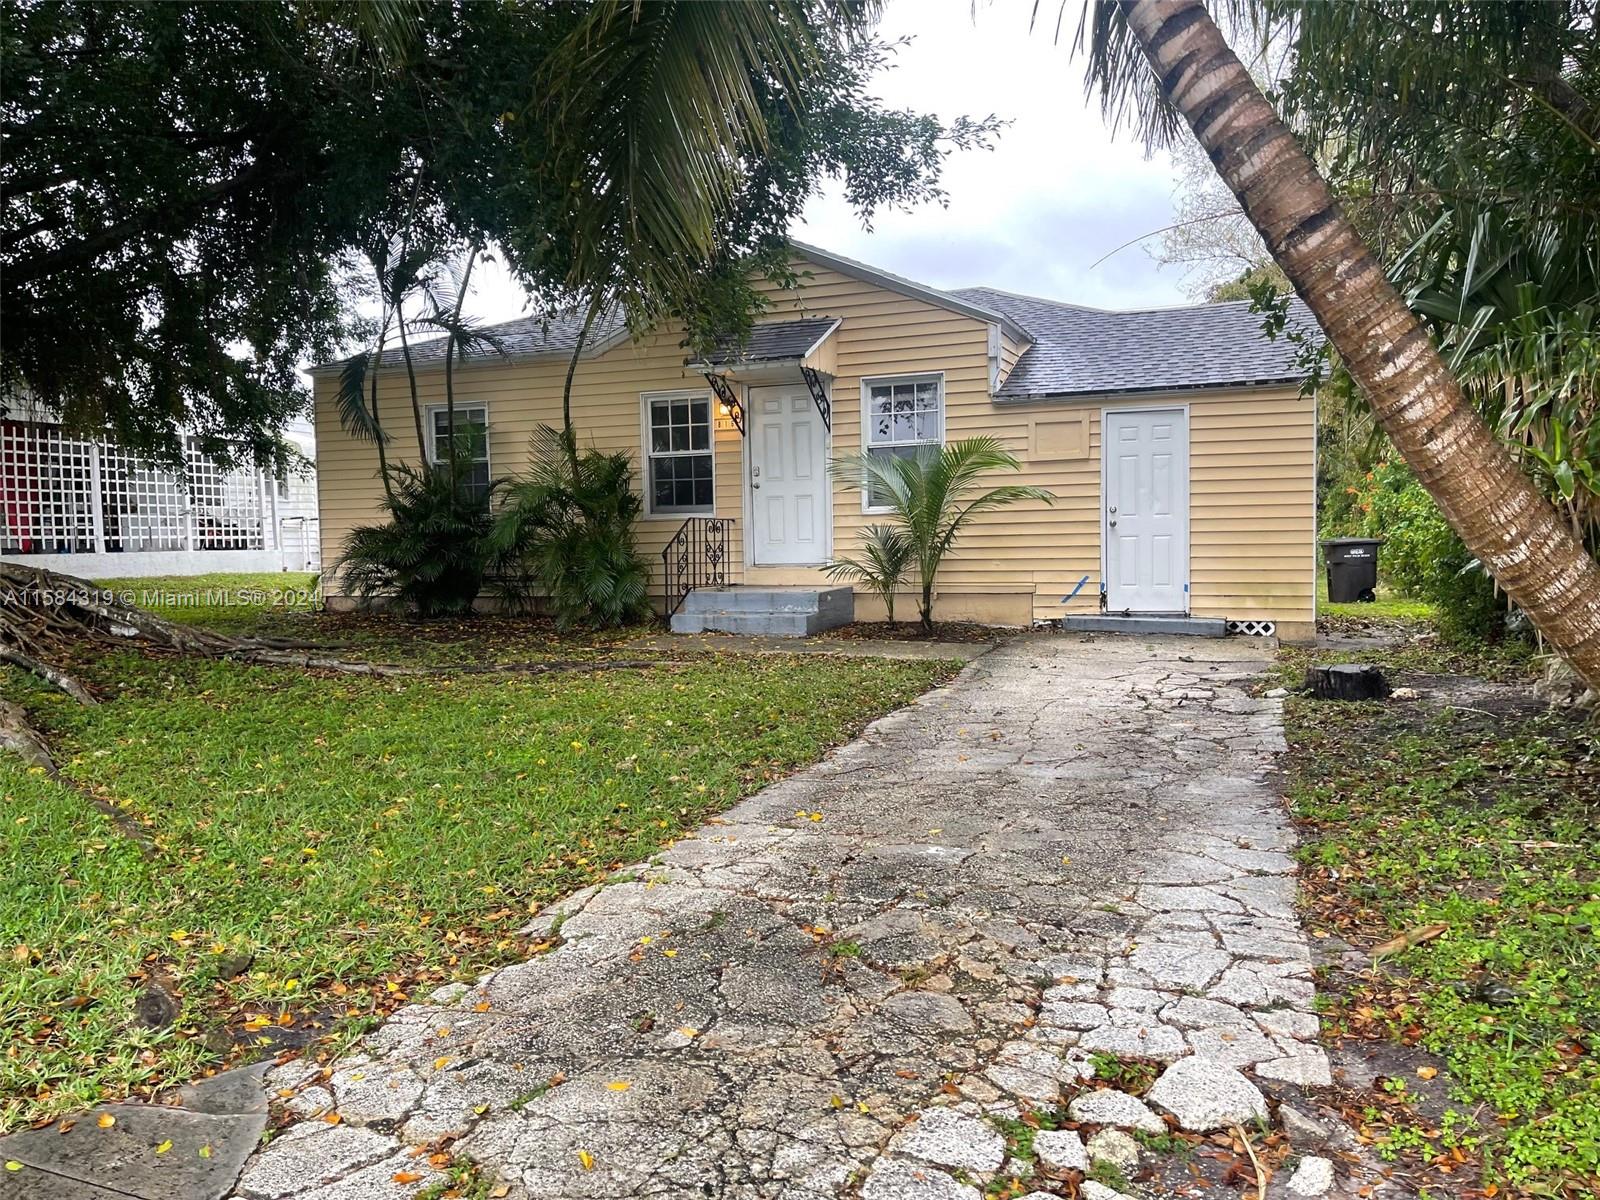 Property for Sale at 816 Tuscaloosa St St, West Palm Beach, Palm Beach County, Florida - Bedrooms: 3 
Bathrooms: 2  - $389,900